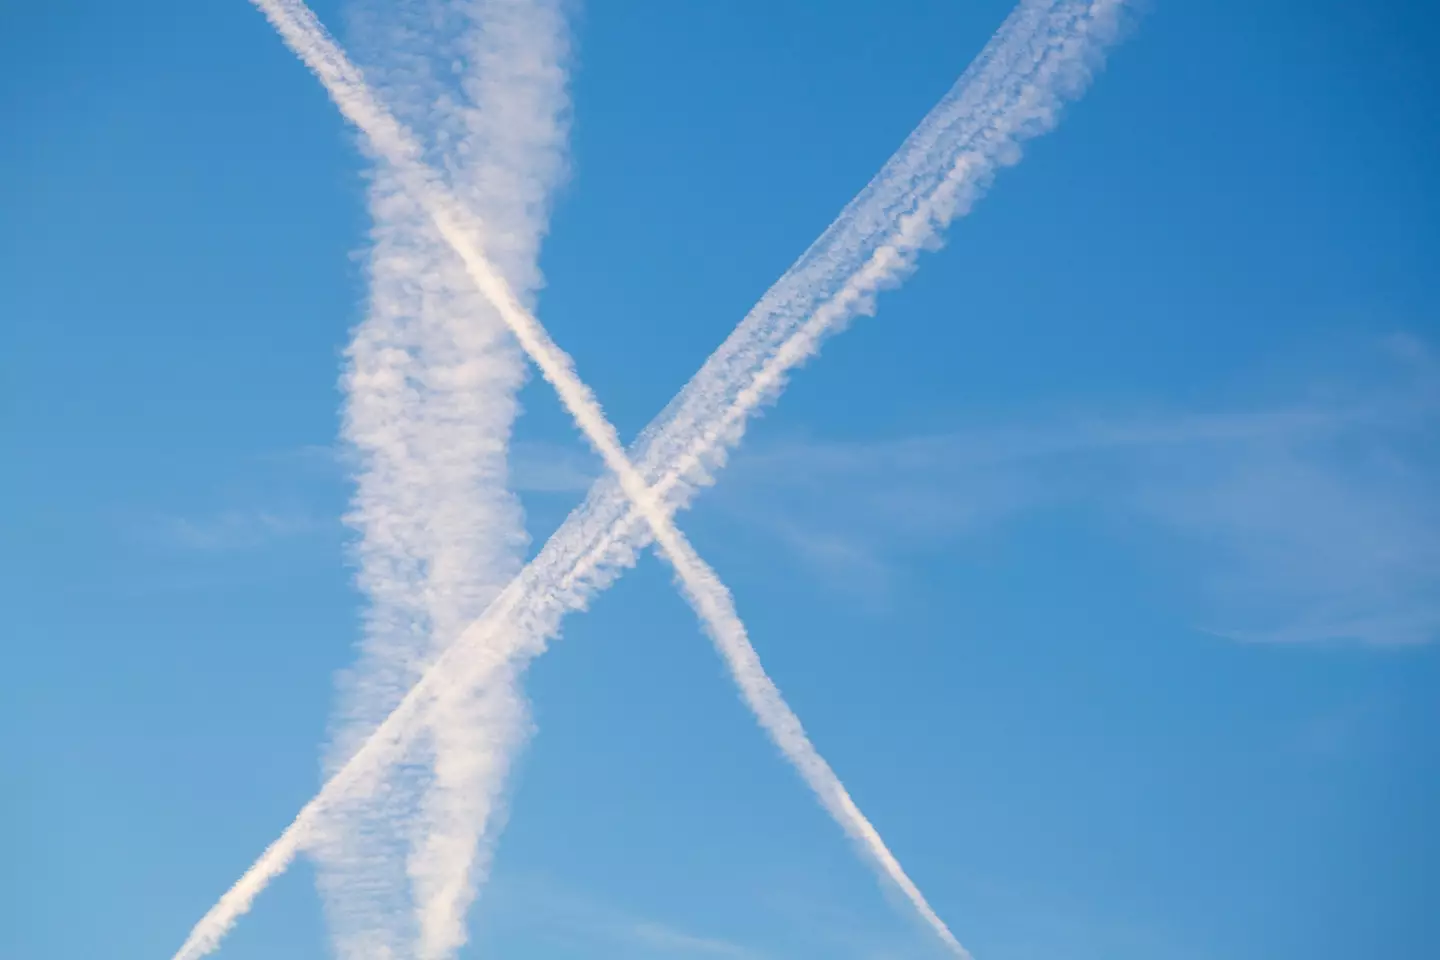 Several people were sure it was a contrail from a plane being affected by an optical illusion.